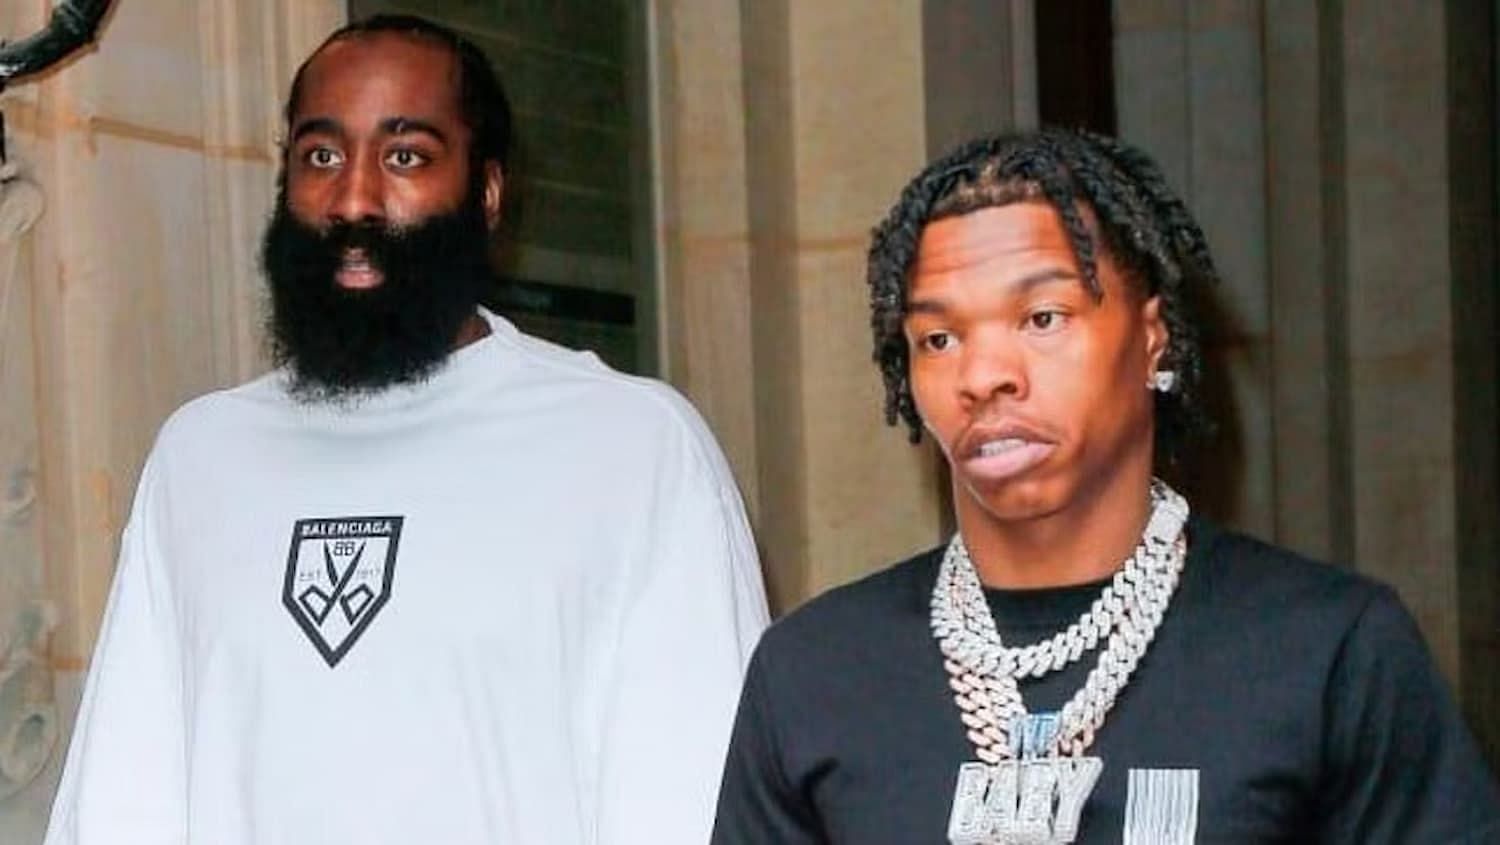 James Harden (left) and Lil Baby have developed a close friendship